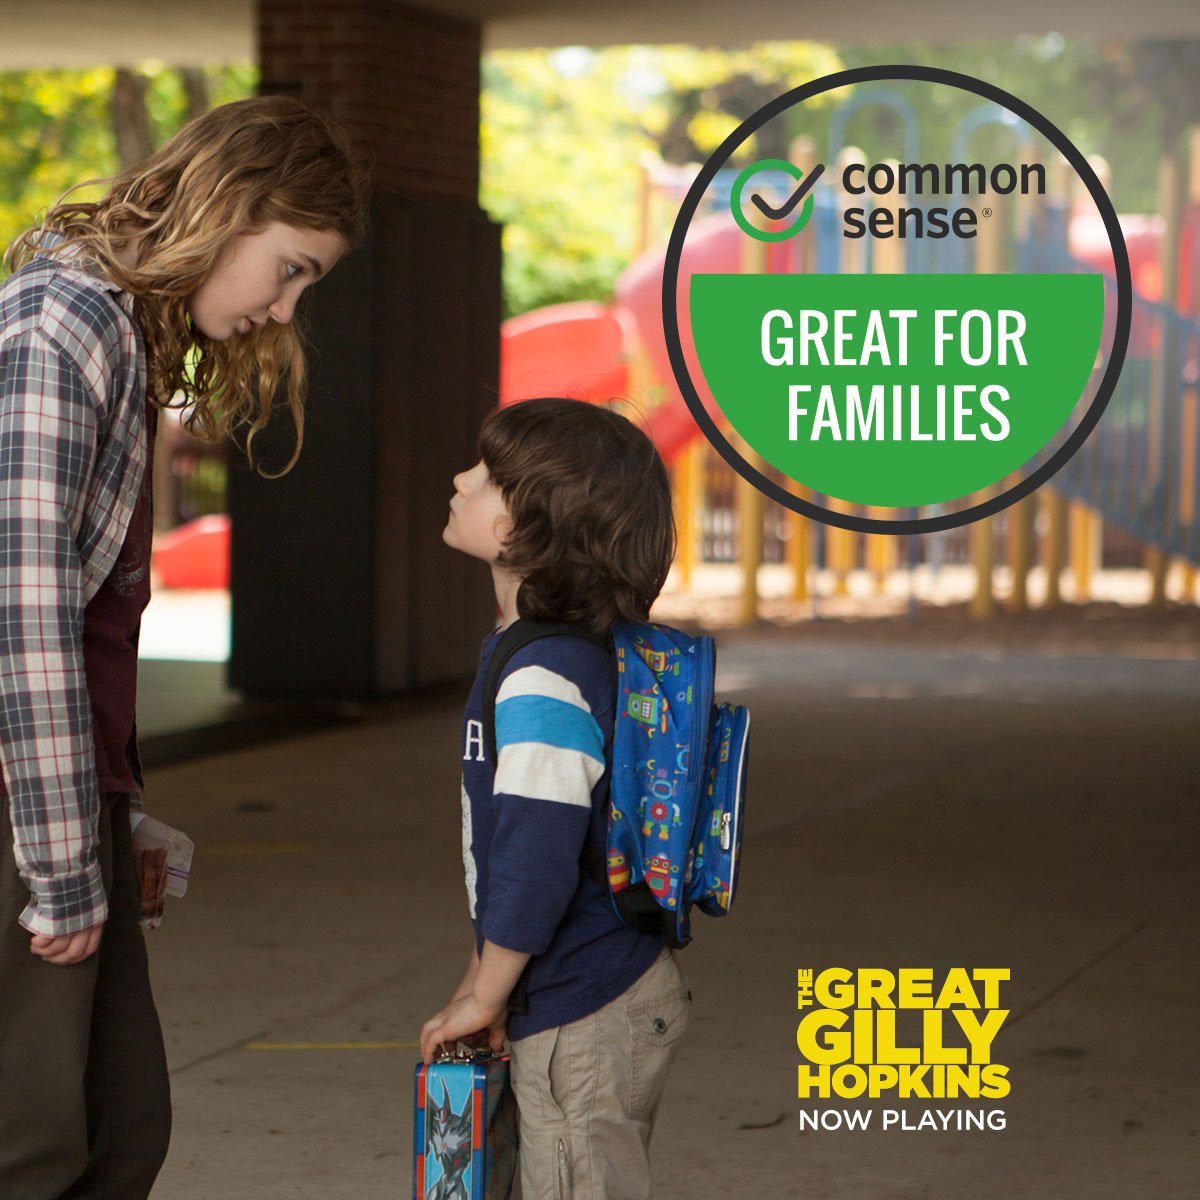 The family-friendly @GreatGillyHopkins is in theaters and on demand now! Buy tickets: thegreatgillyhopkins-movie.com